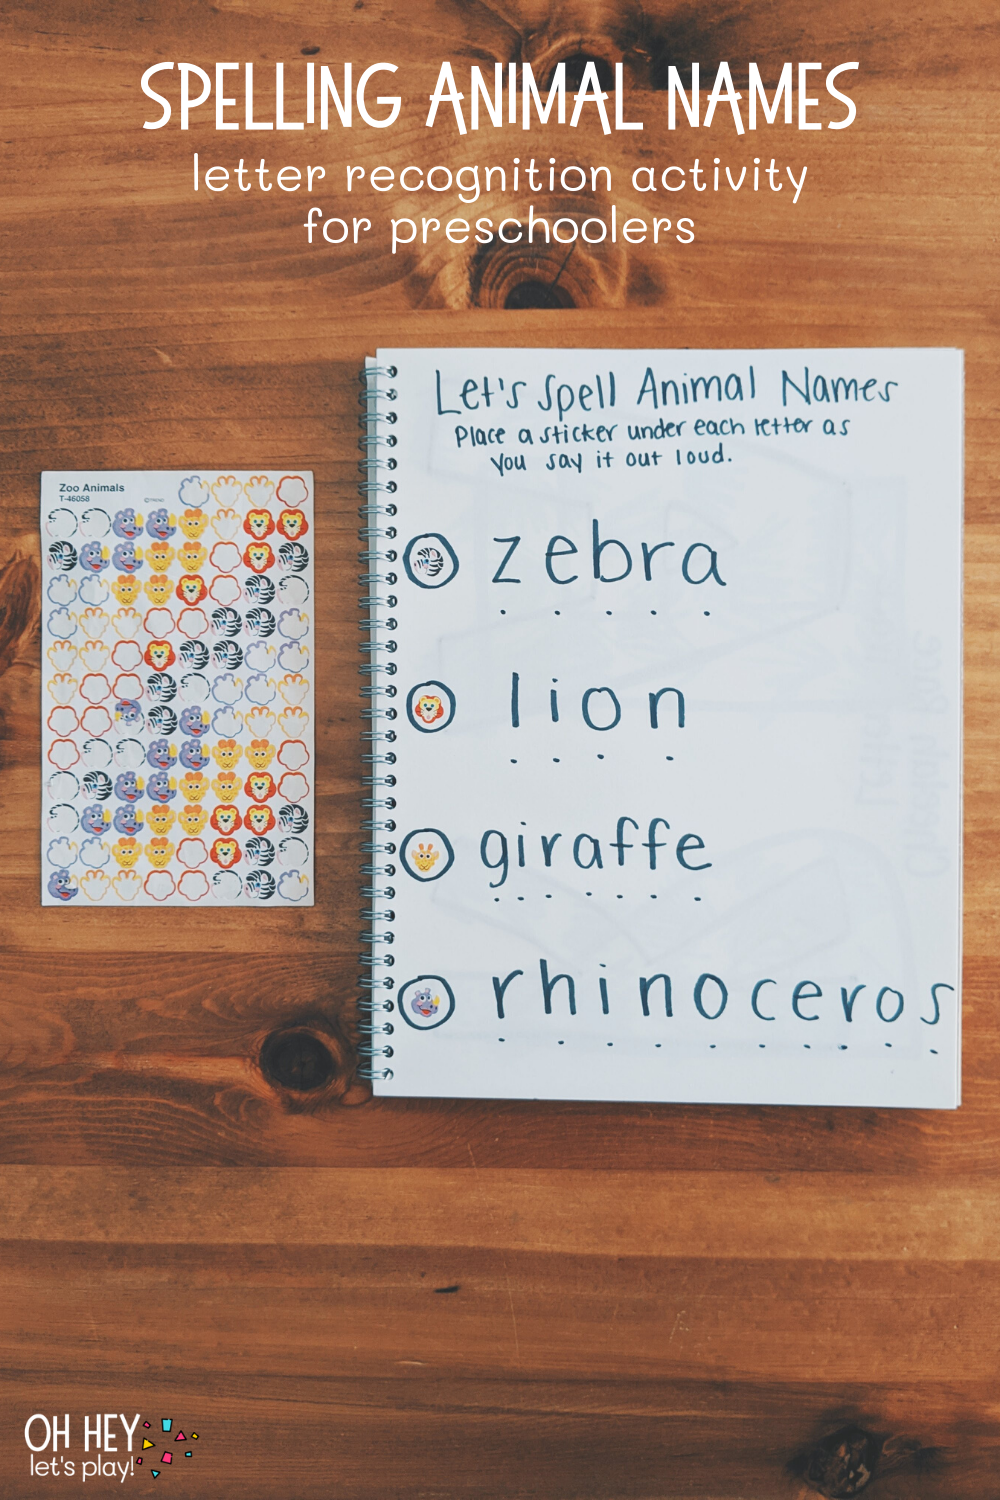 Zoo-Themed Journal Activities for Preschoolers — Oh Hey Let's Play